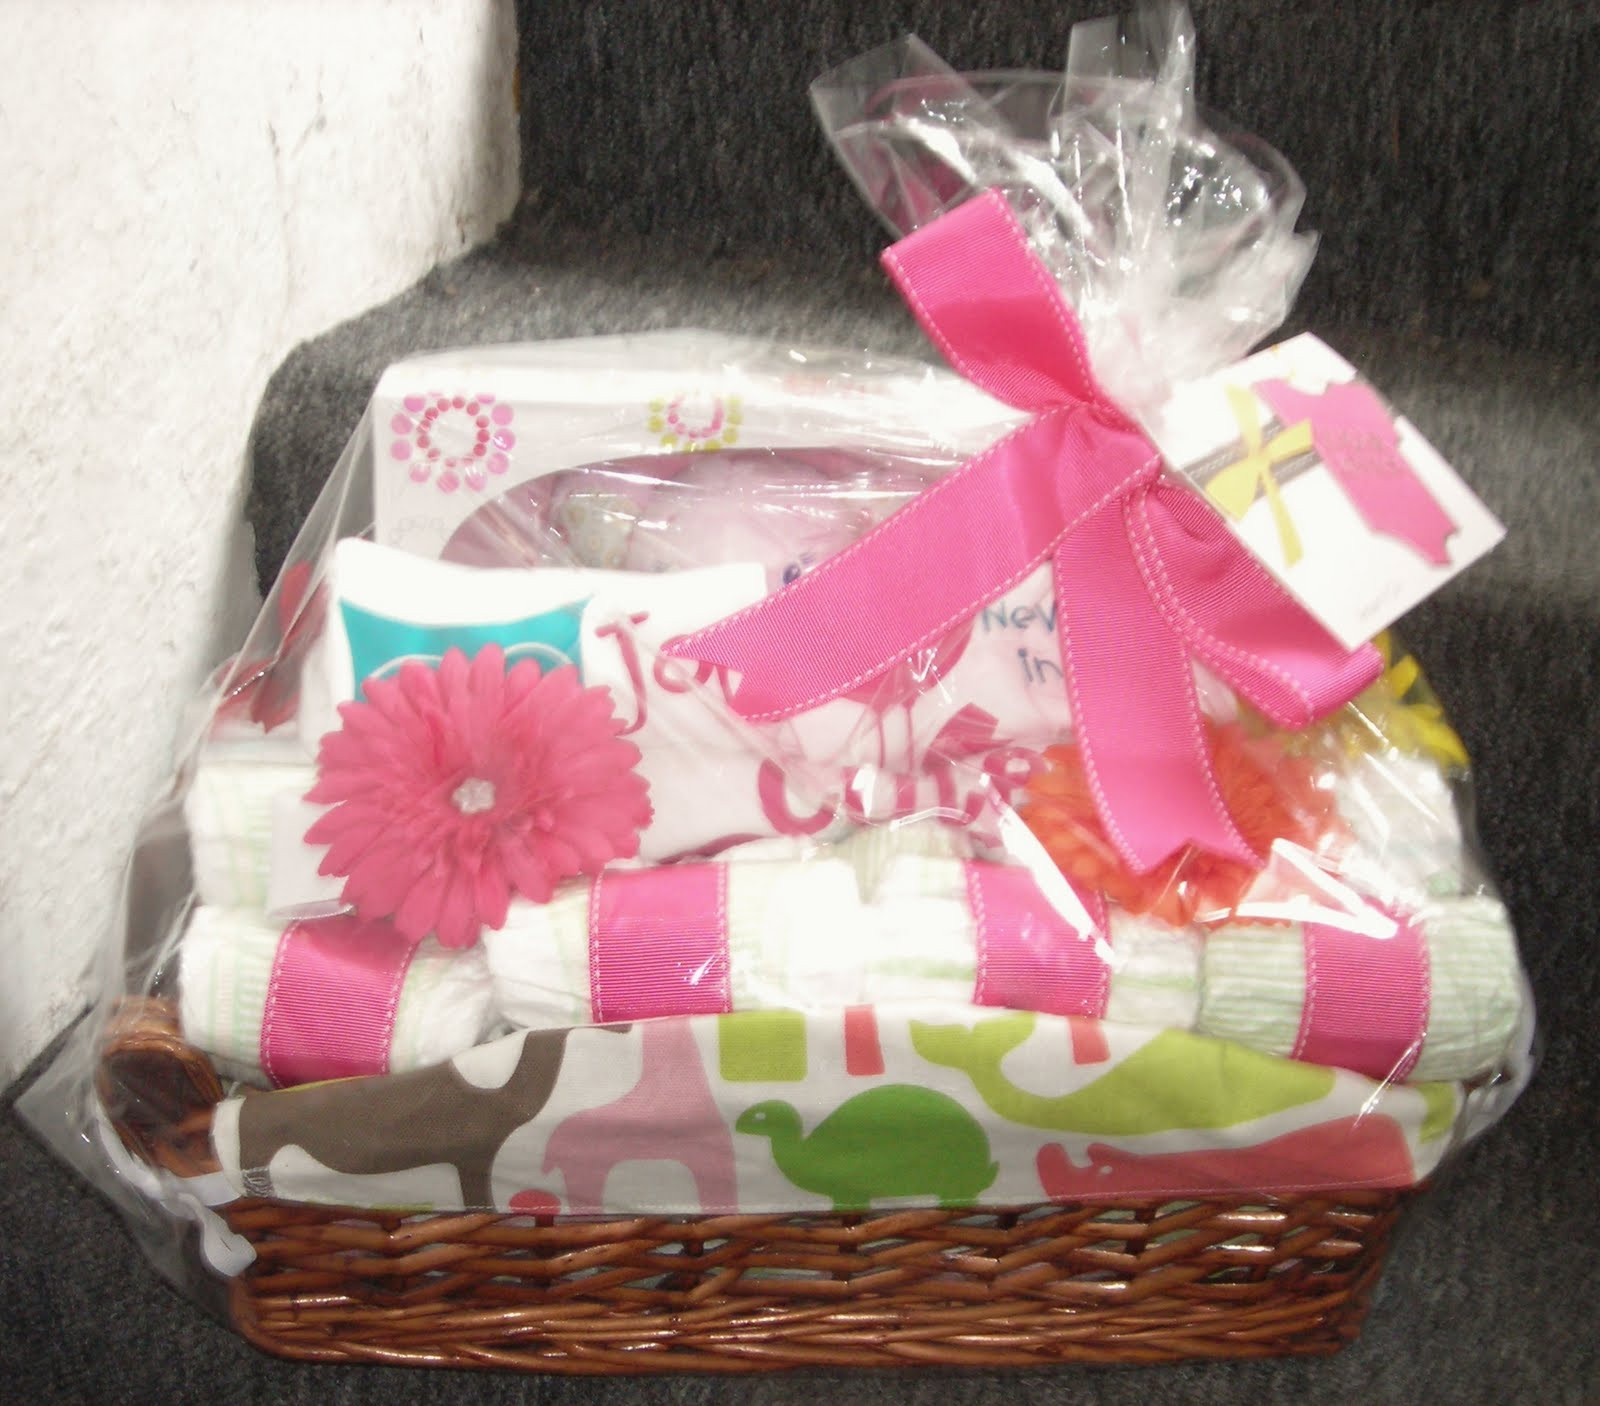 Baby Gift Ideas For Girls
 Life in the Motherhood Baby Shower Gift Basket For a